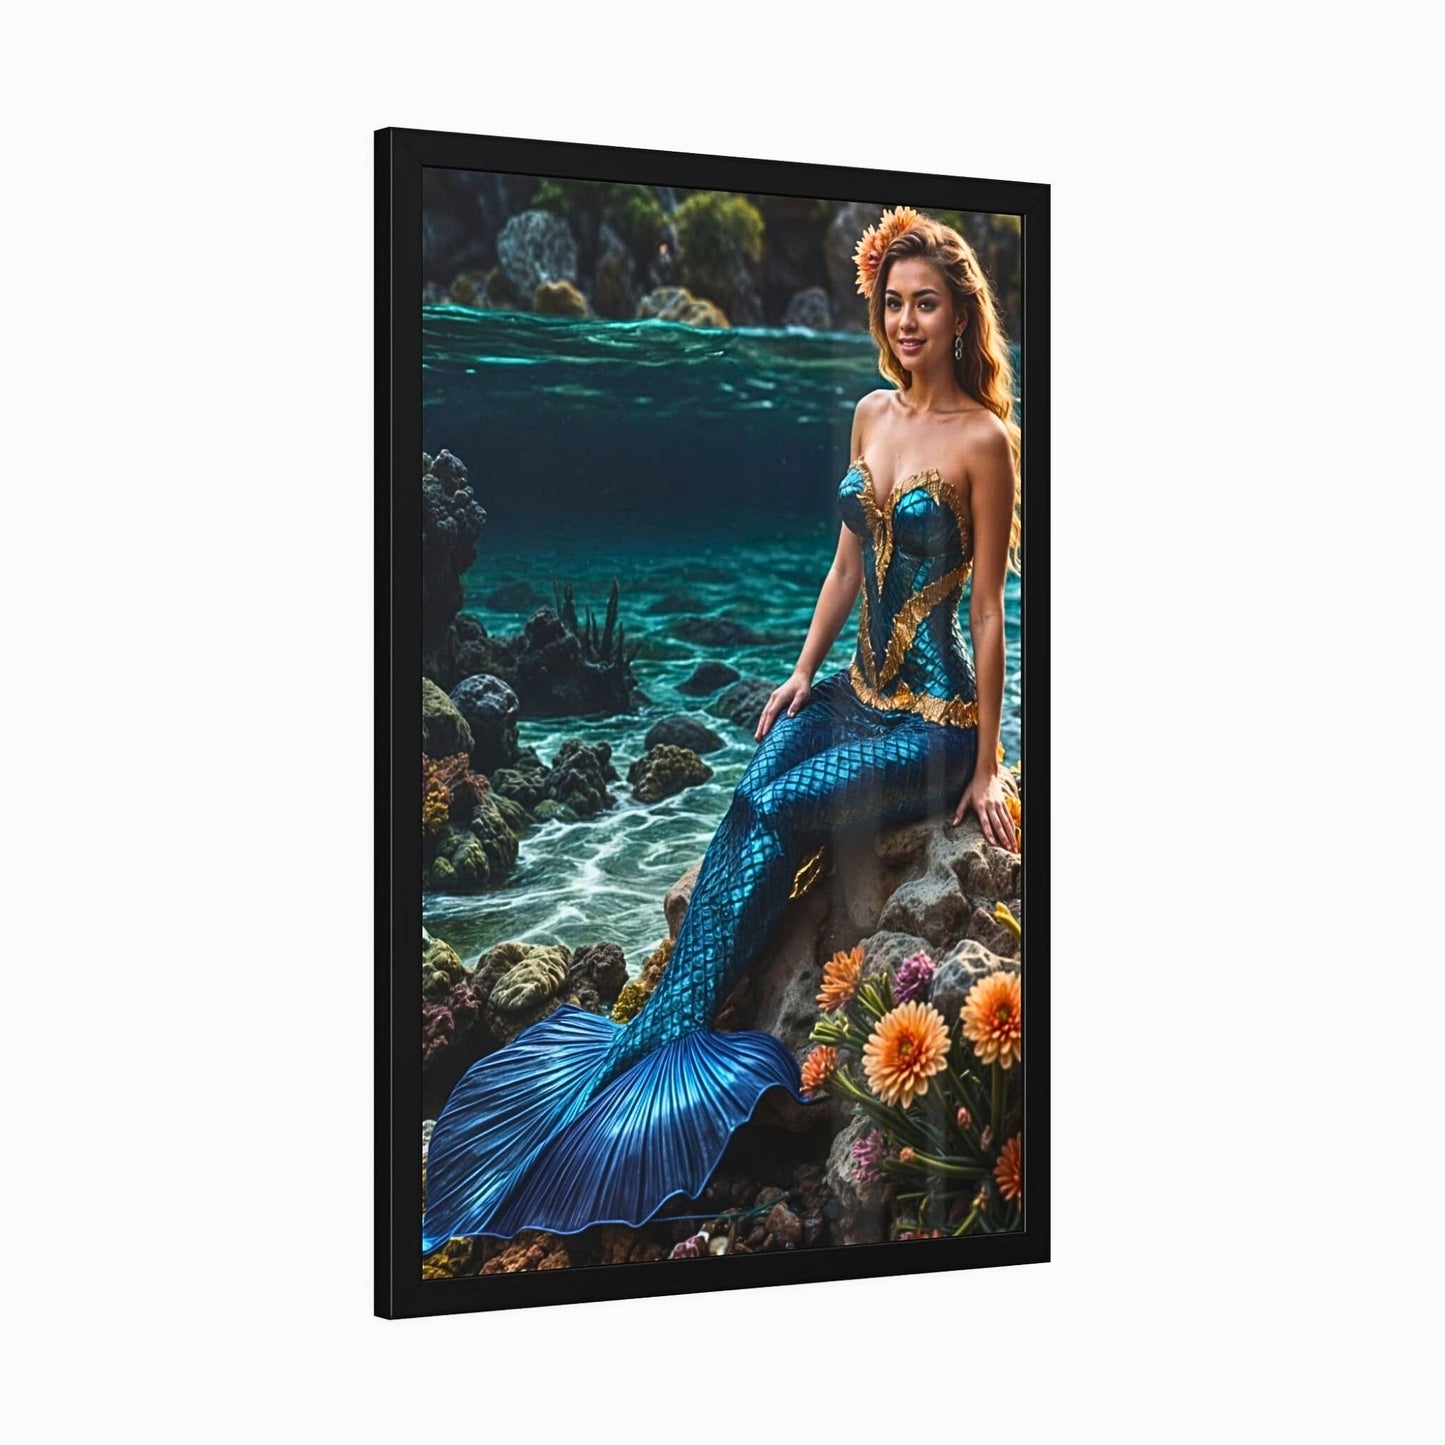 Transform your cherished photo into a stunning Custom Mermaid Portrait. Perfect for a Personalized Princess Mermaid Portrait From Photo, this Fantasy Female Portrait makes an unforgettable Birthday gift for a woman. Hang it on your wall for a unique touch. Ideal for Mermaid Gifts or Princess Birthday Gift, this Custom Portrait for Girls will delight anyone. Convert any Photo to mermaid portrait or Princess Photo portrait effortlessly. It's the Custom Mermaid Portrait you've been dreaming of!